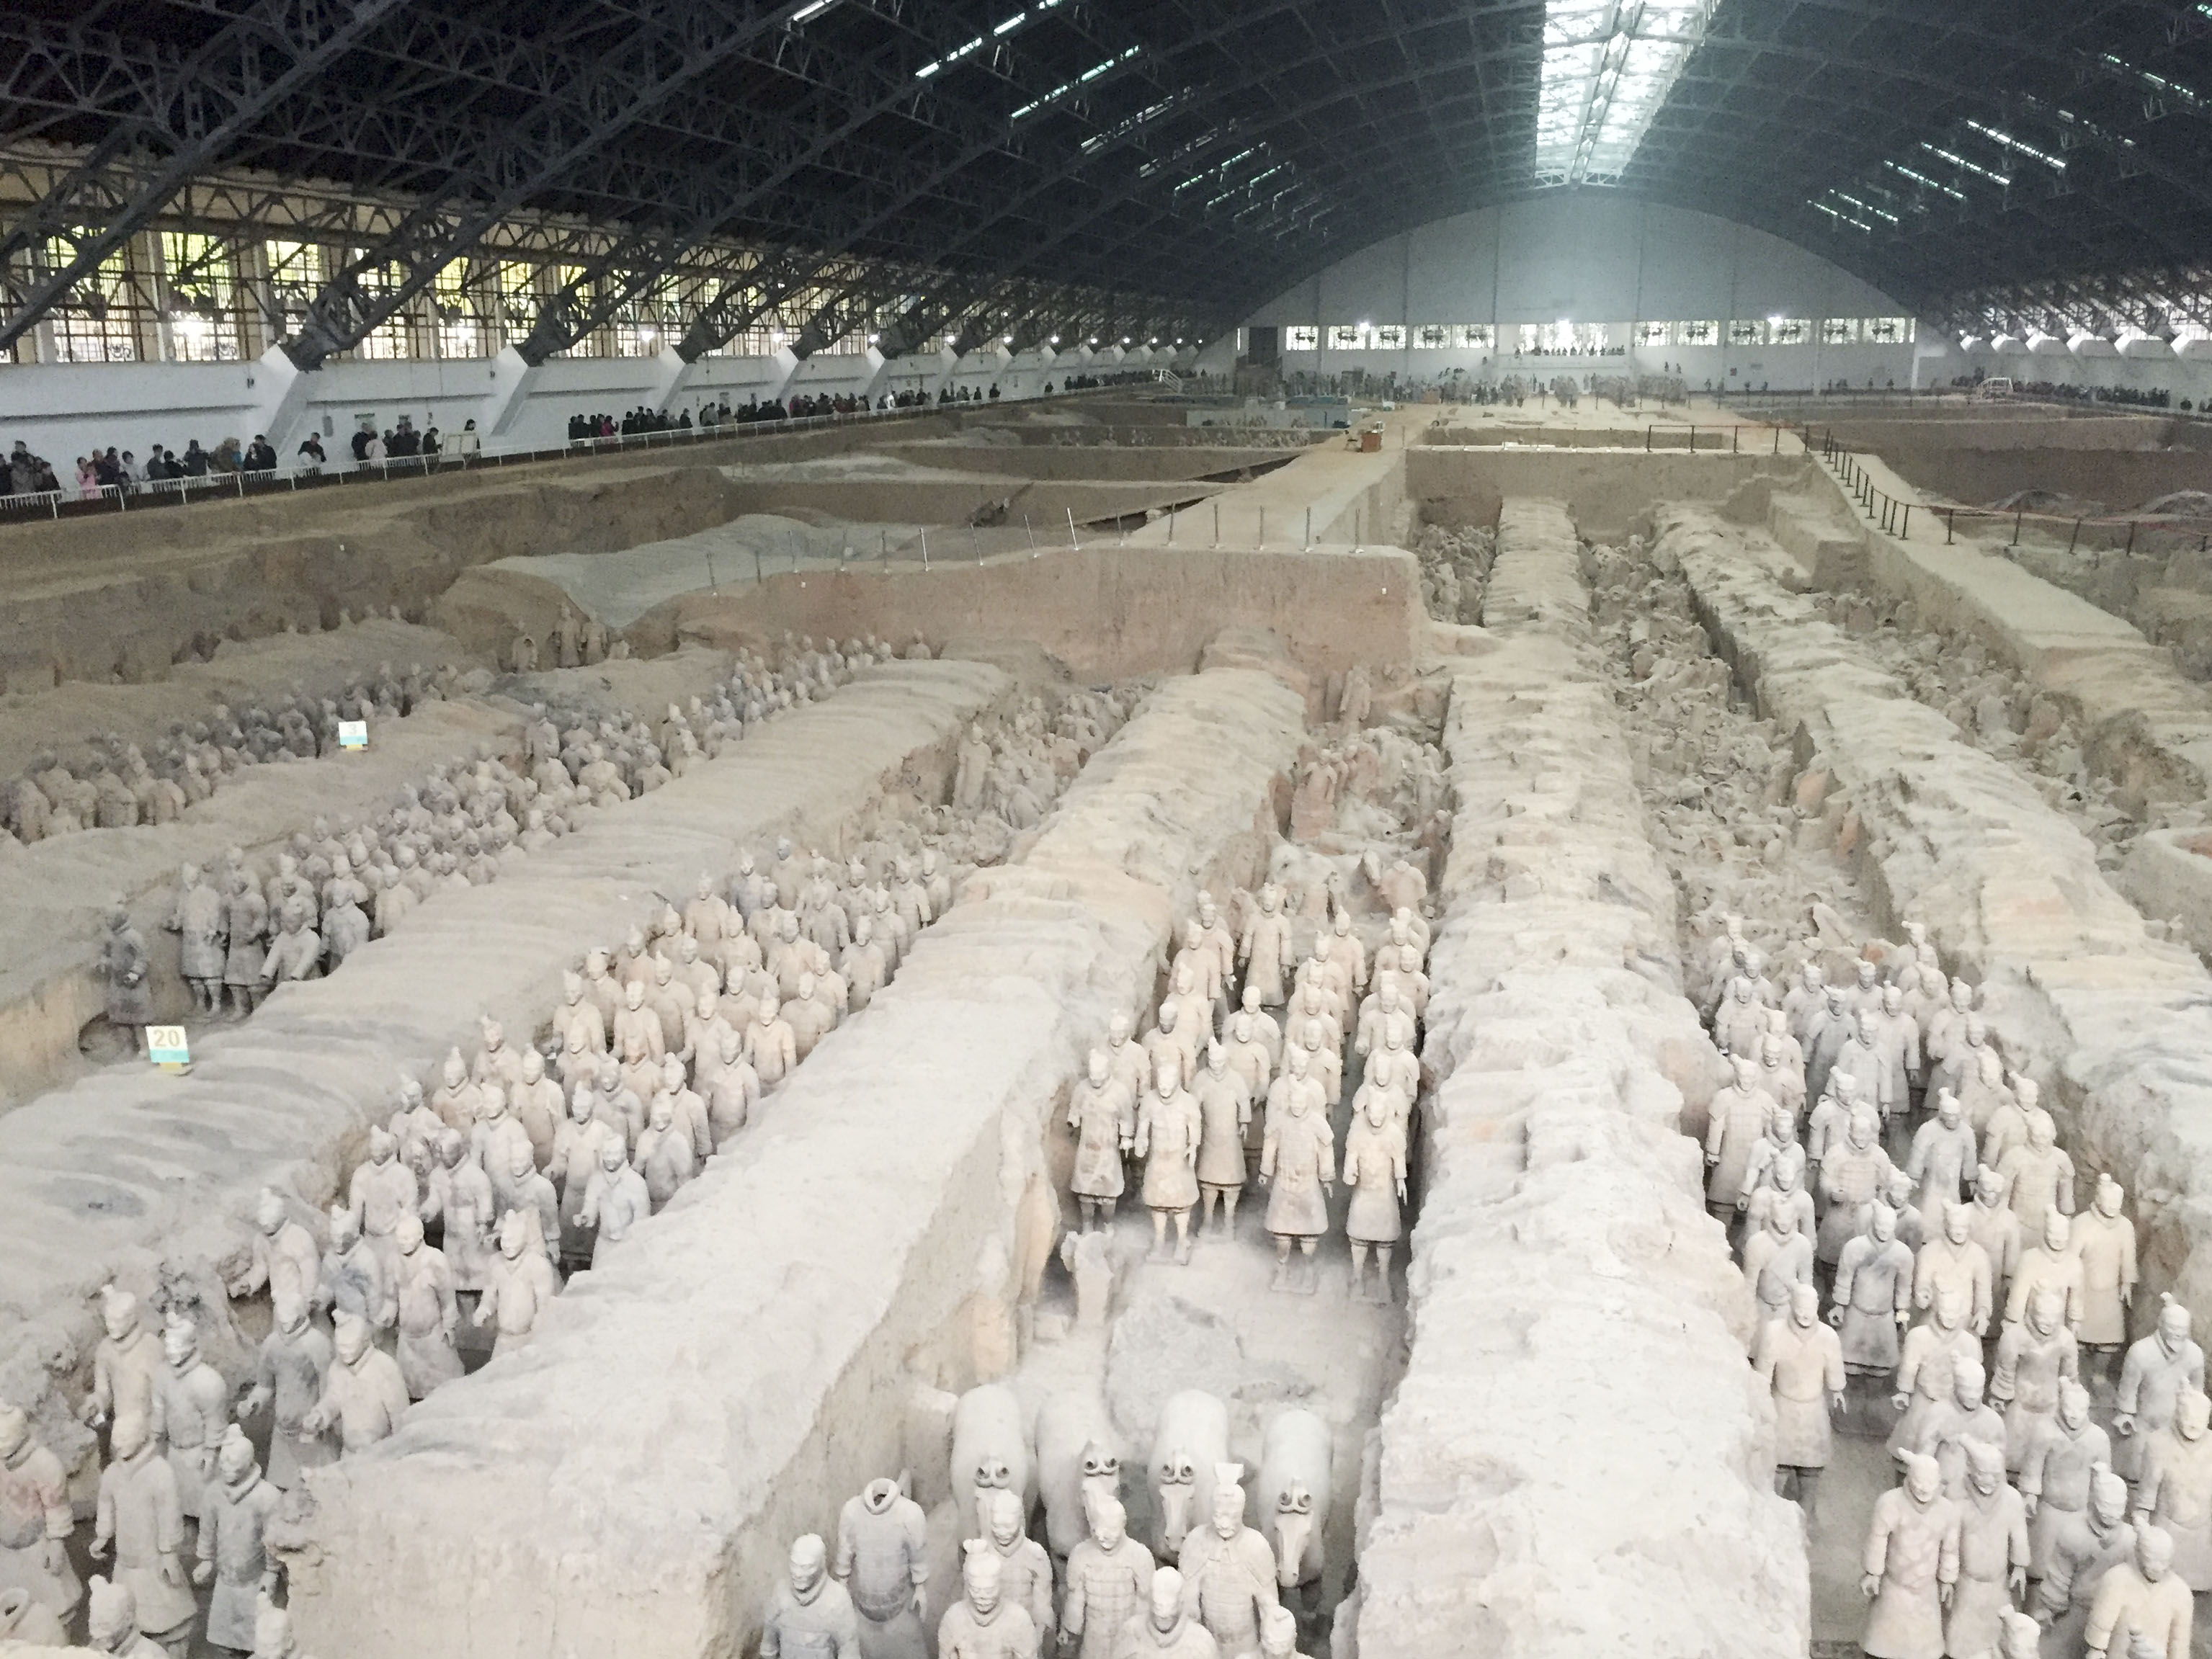 Quin Dynasty Army, Terra Cotta Soldiers, China, BRHA, Bruce Hamilton Architects,